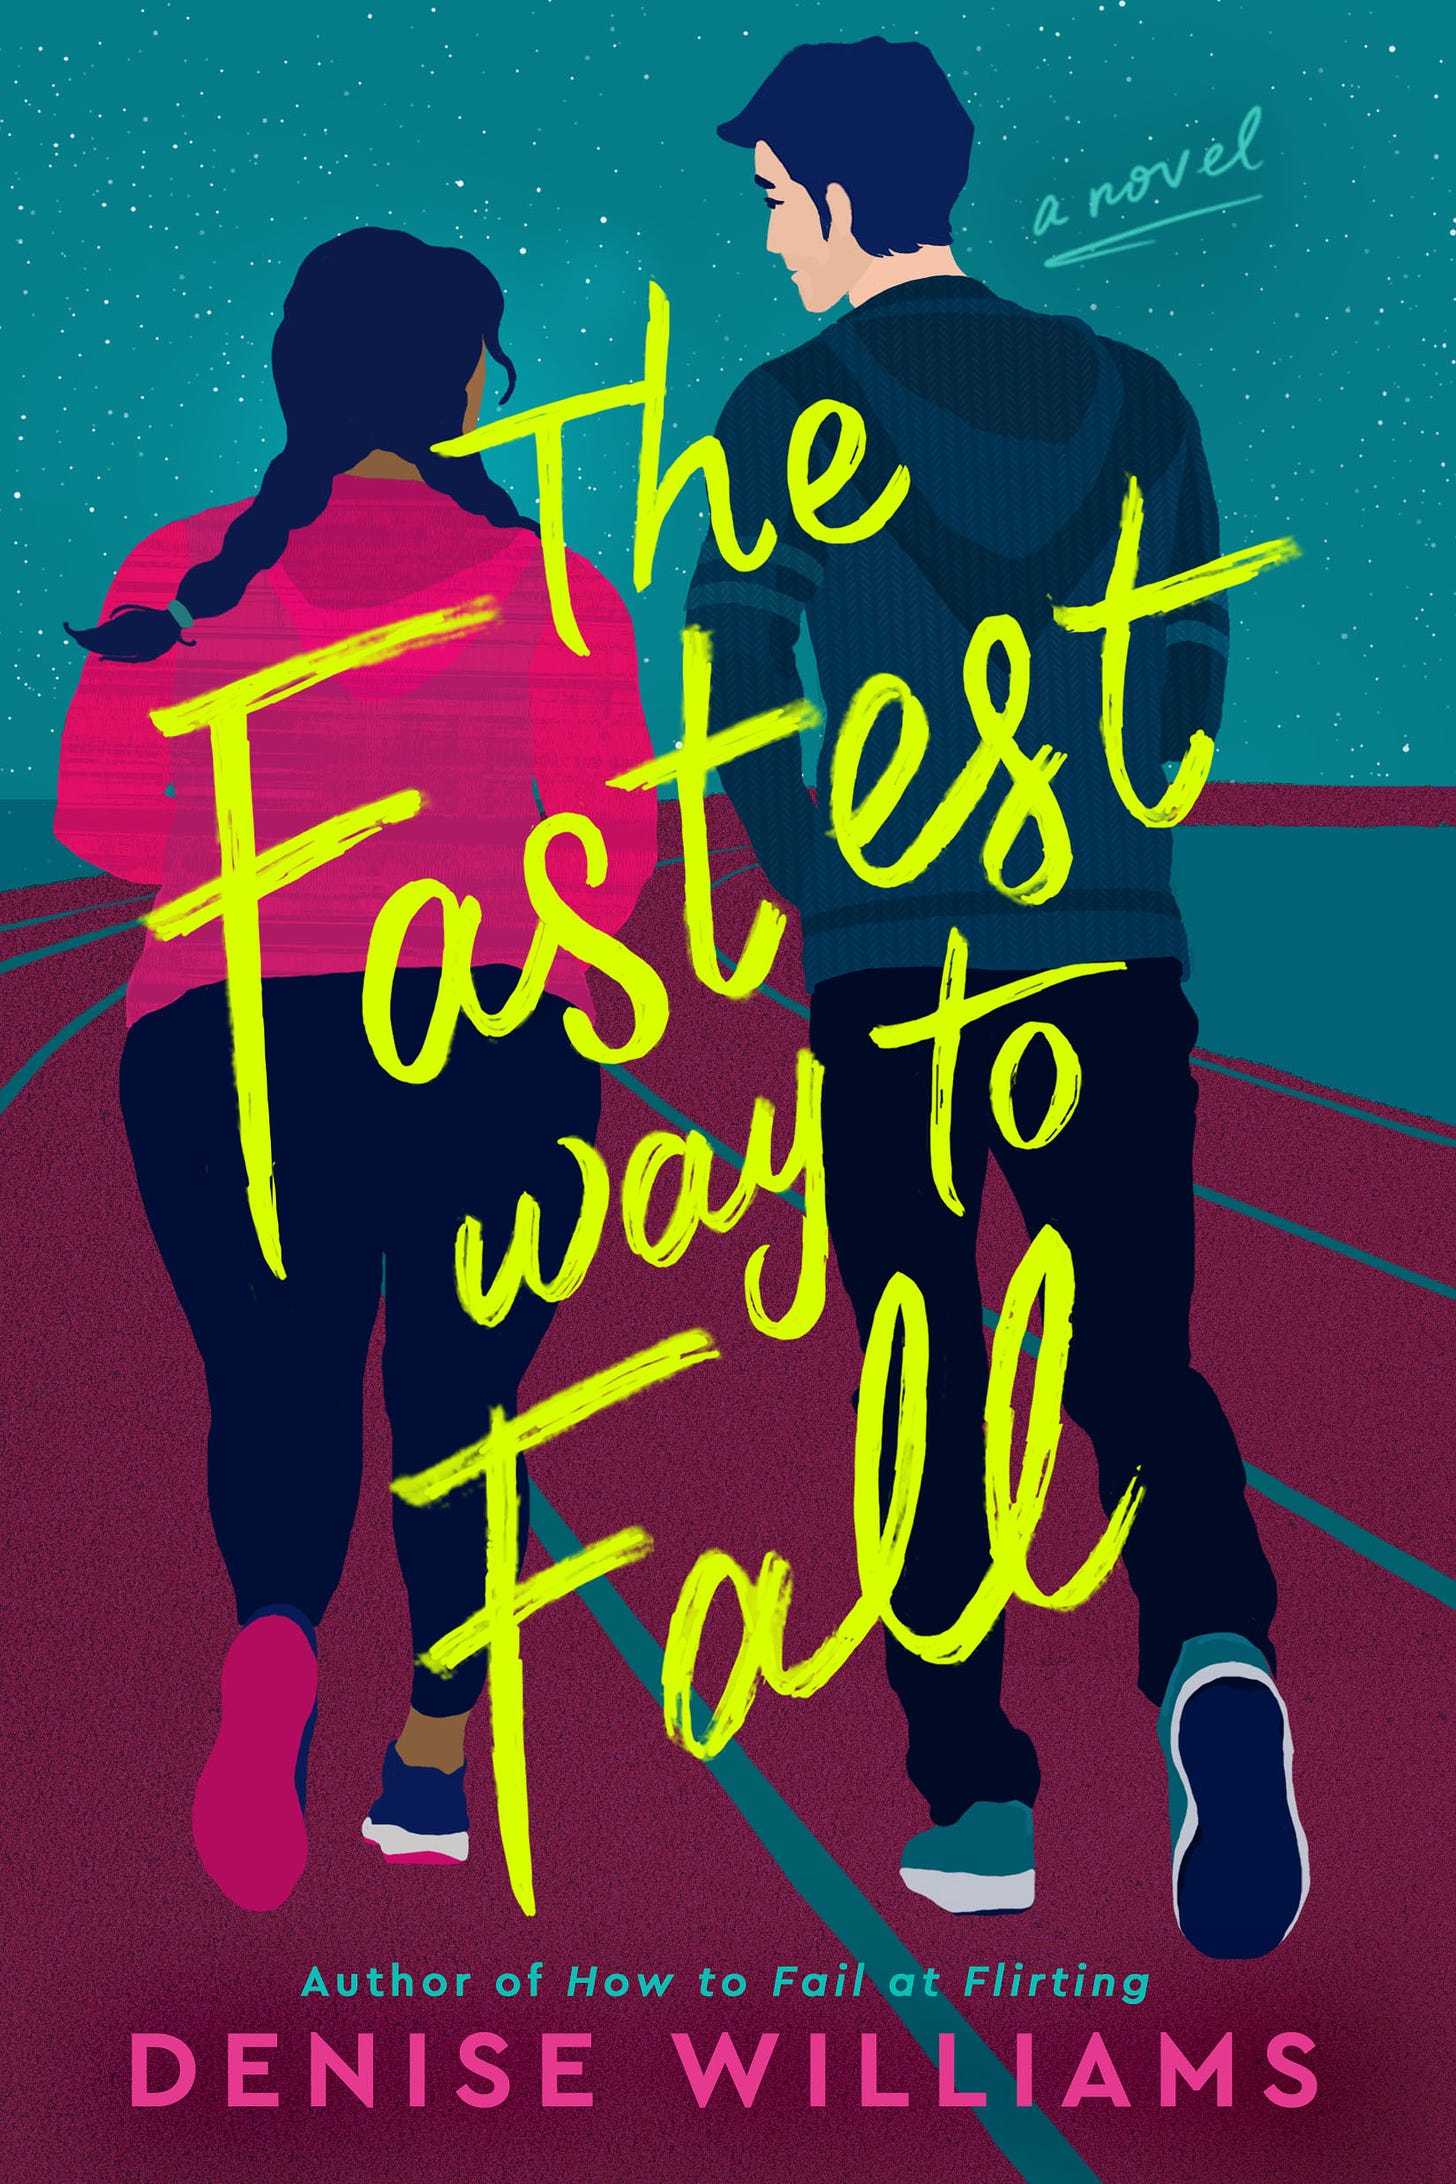 The Fastest Way to Fall by Denise Williams | Goodreads